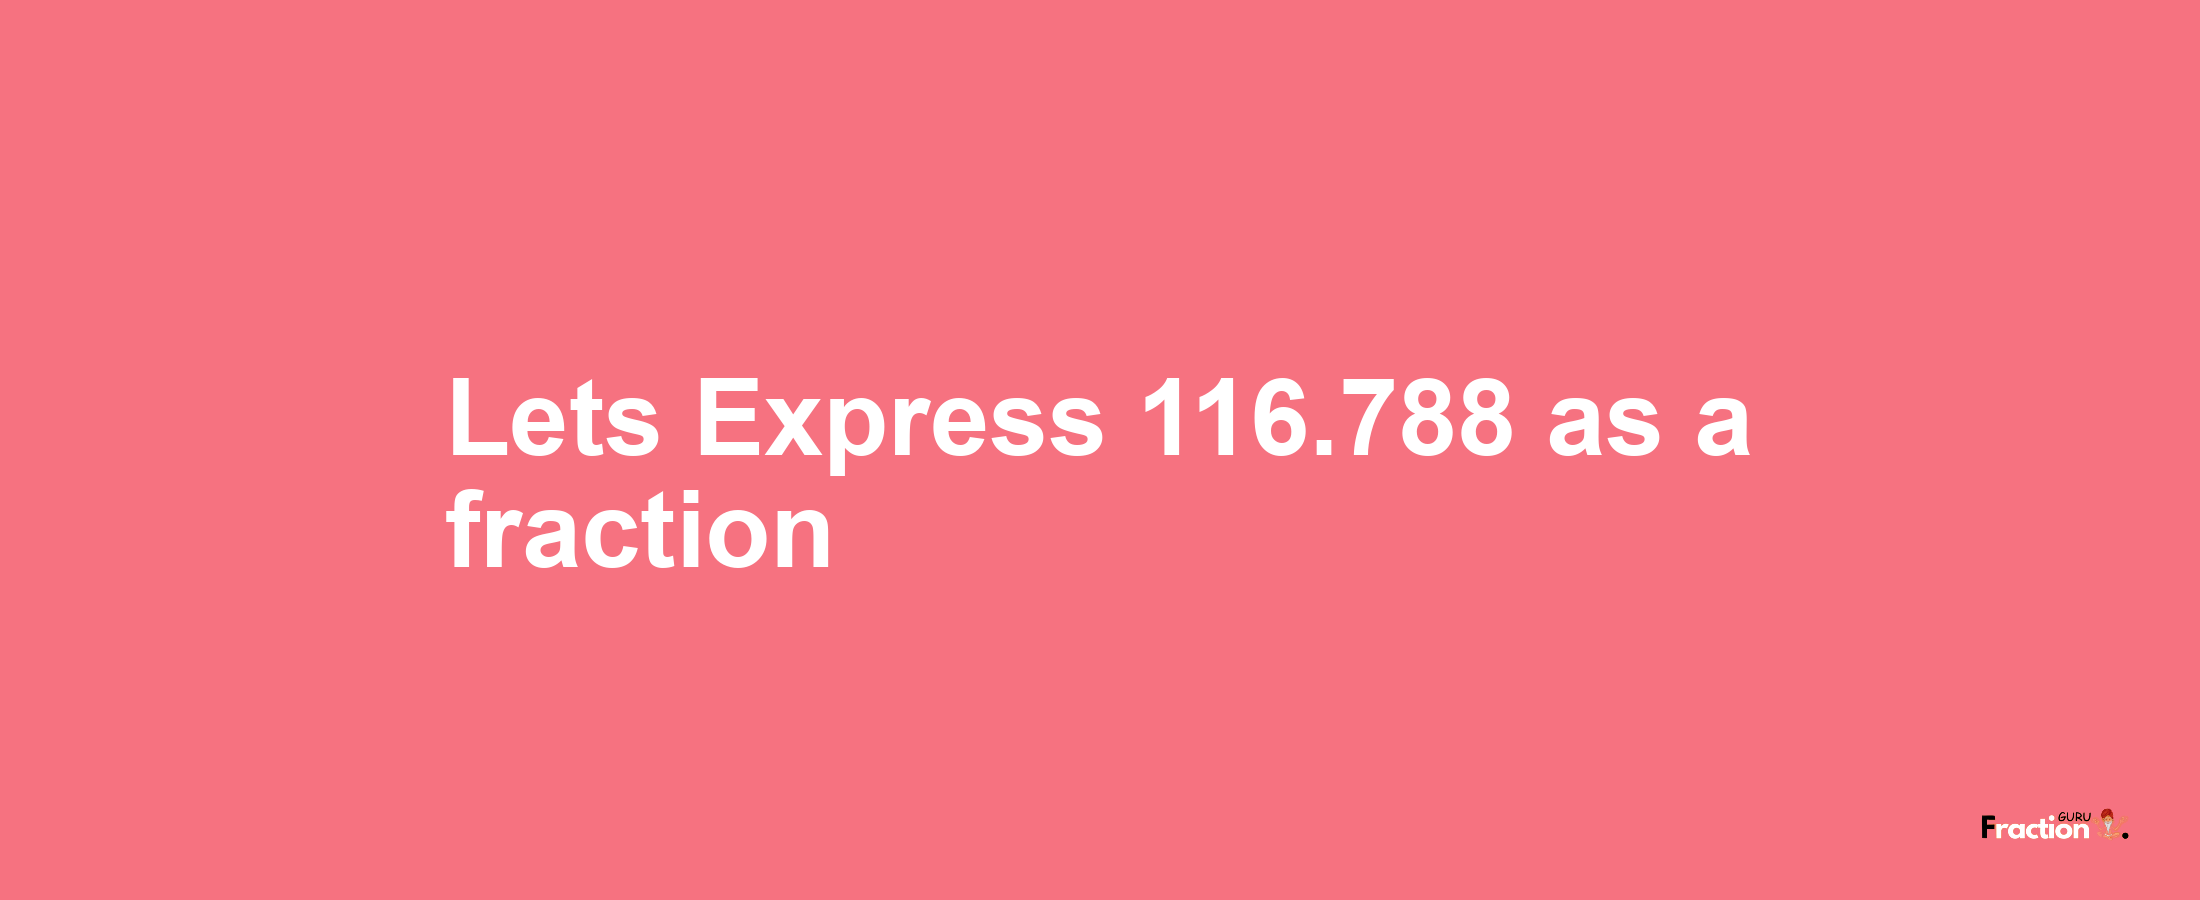 Lets Express 116.788 as afraction